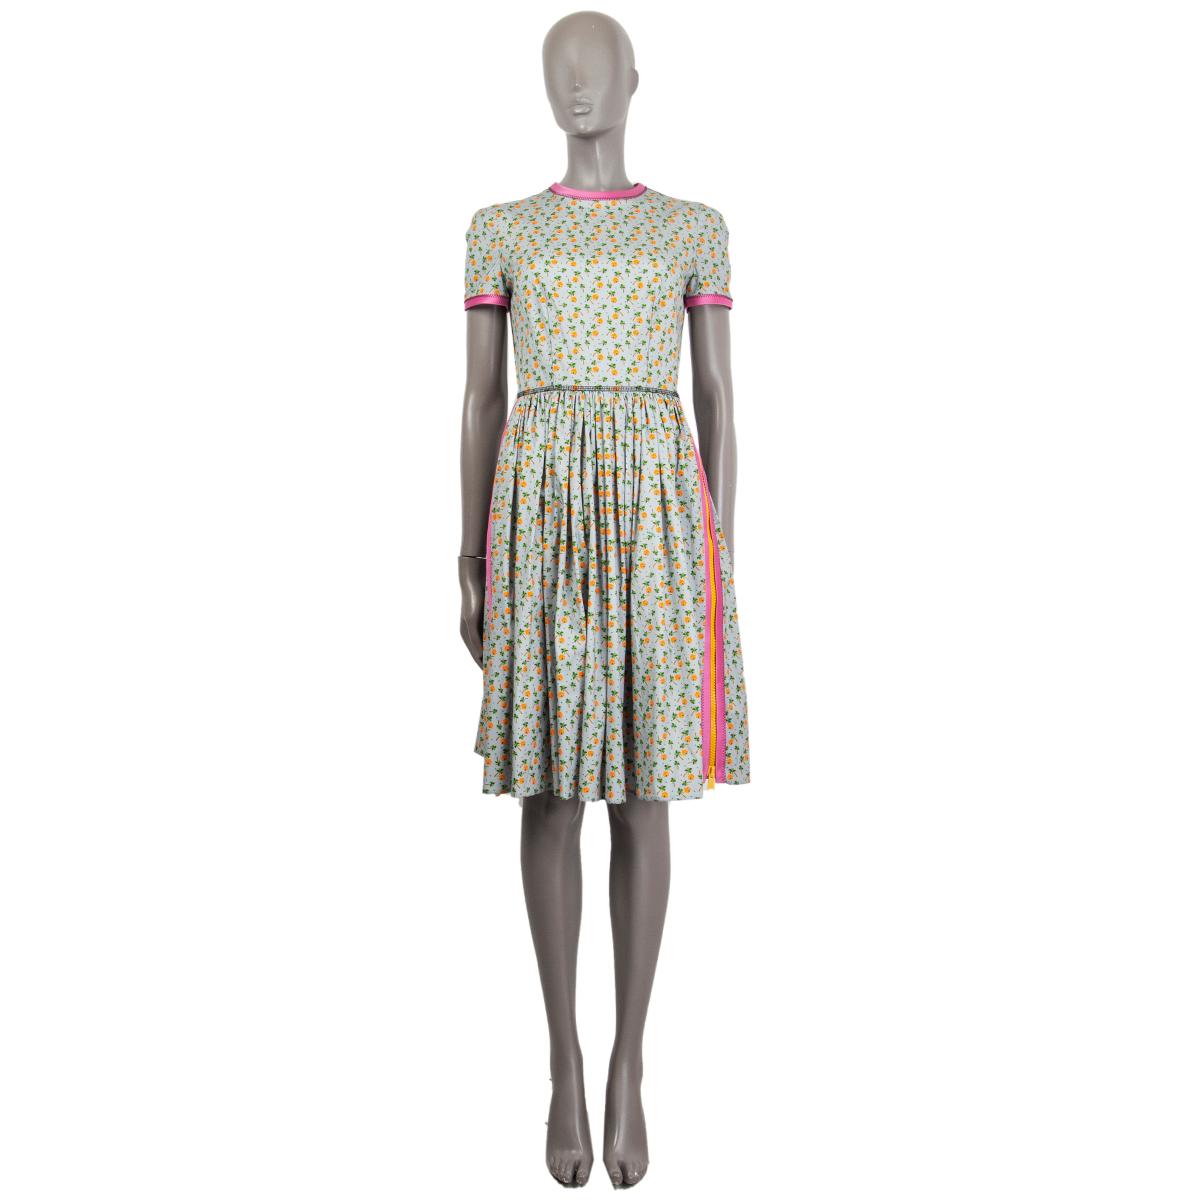 100% authentic Prada beach hut and palm trees print dress in multi-color cotton (94%) and elastane (6%) with a round neck and yellow zippers on each sides. Has mulbery contrasting hem fabric details. Closes on the back with a concealed zipper.